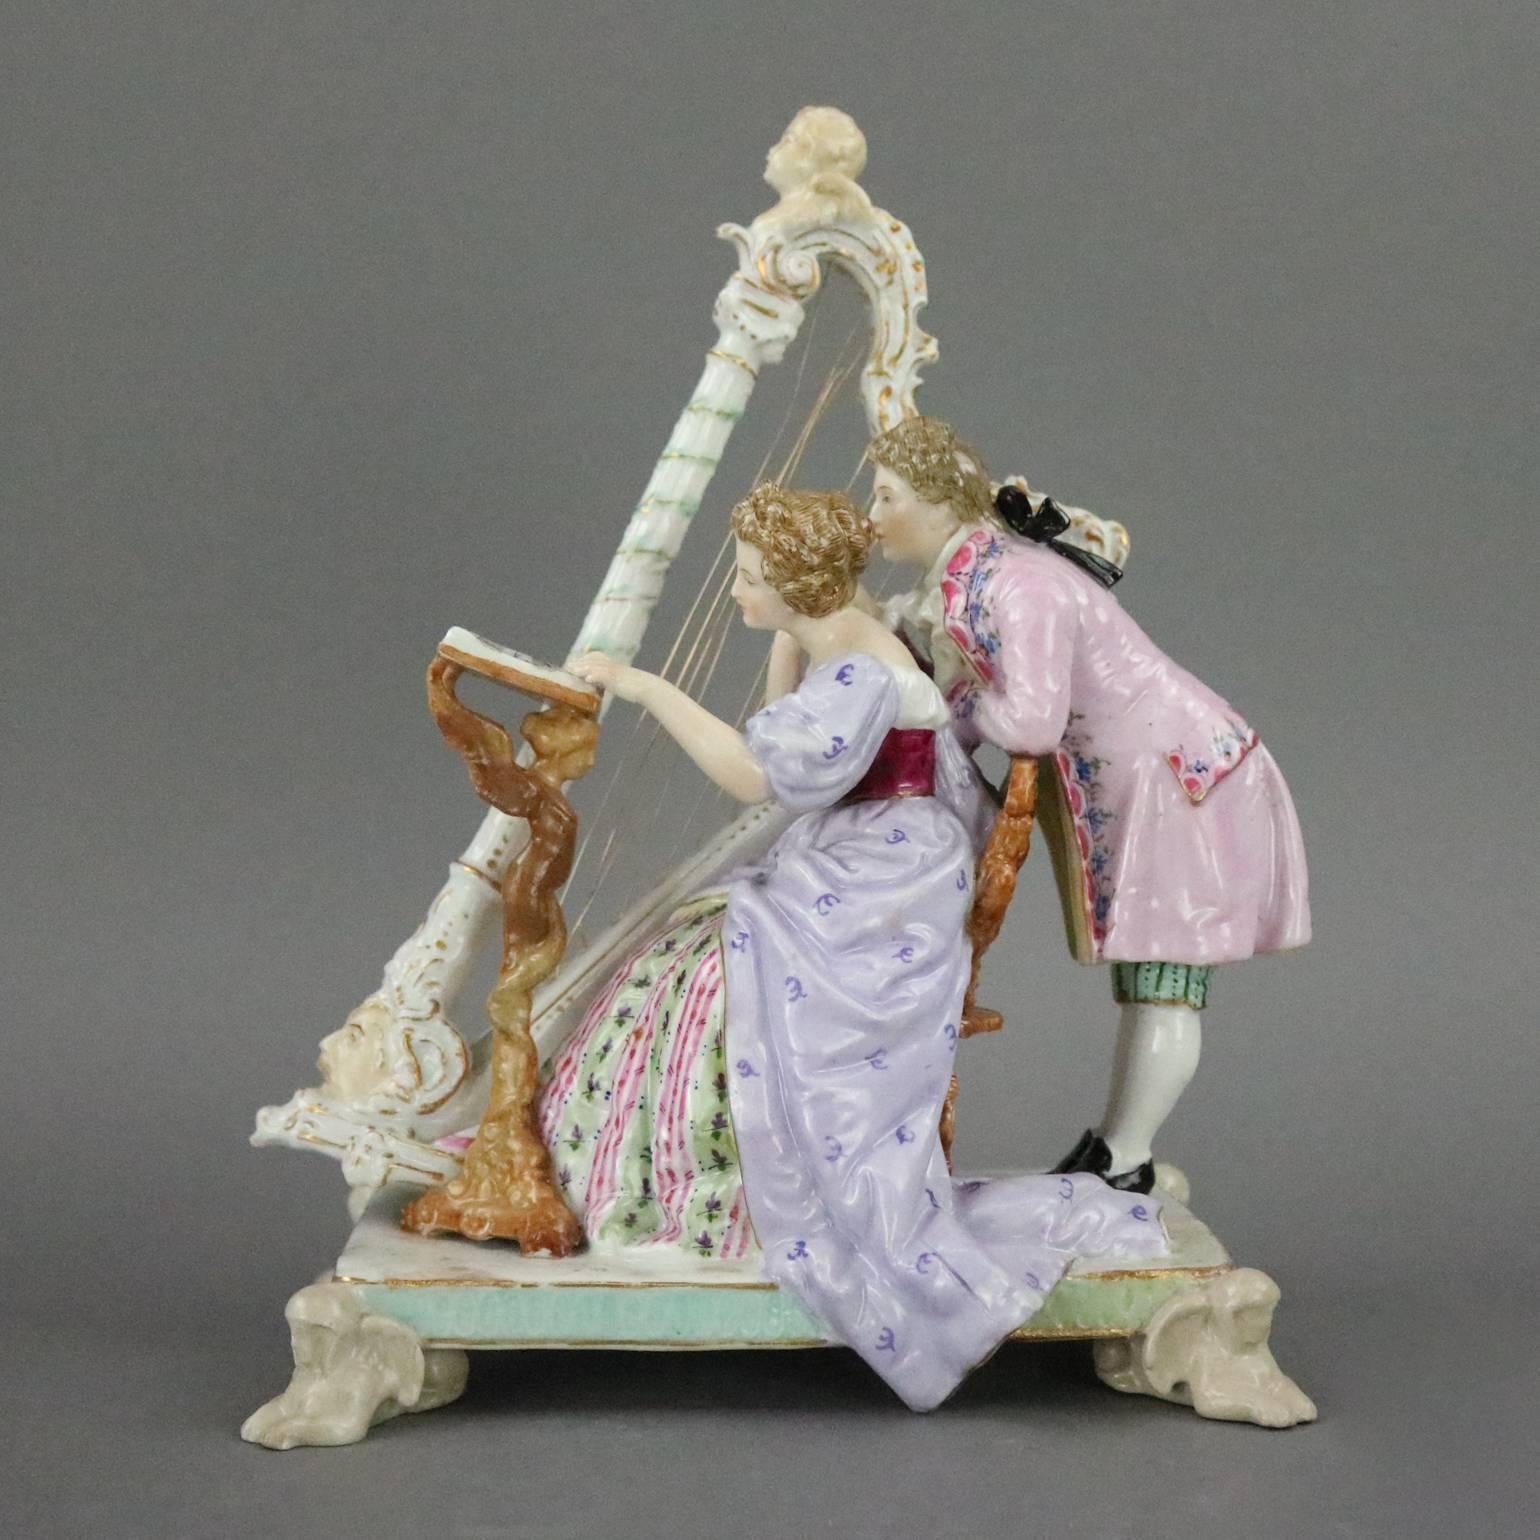 Antique German Ludwigsburg hand-painted and gilt porcelain figural group of harpist and assistant reviewing sheet music together, maker mark on base, three stags horns Arms of Wurtembere in blue, circa 1820

Measures: 7.5" H x 7" W x